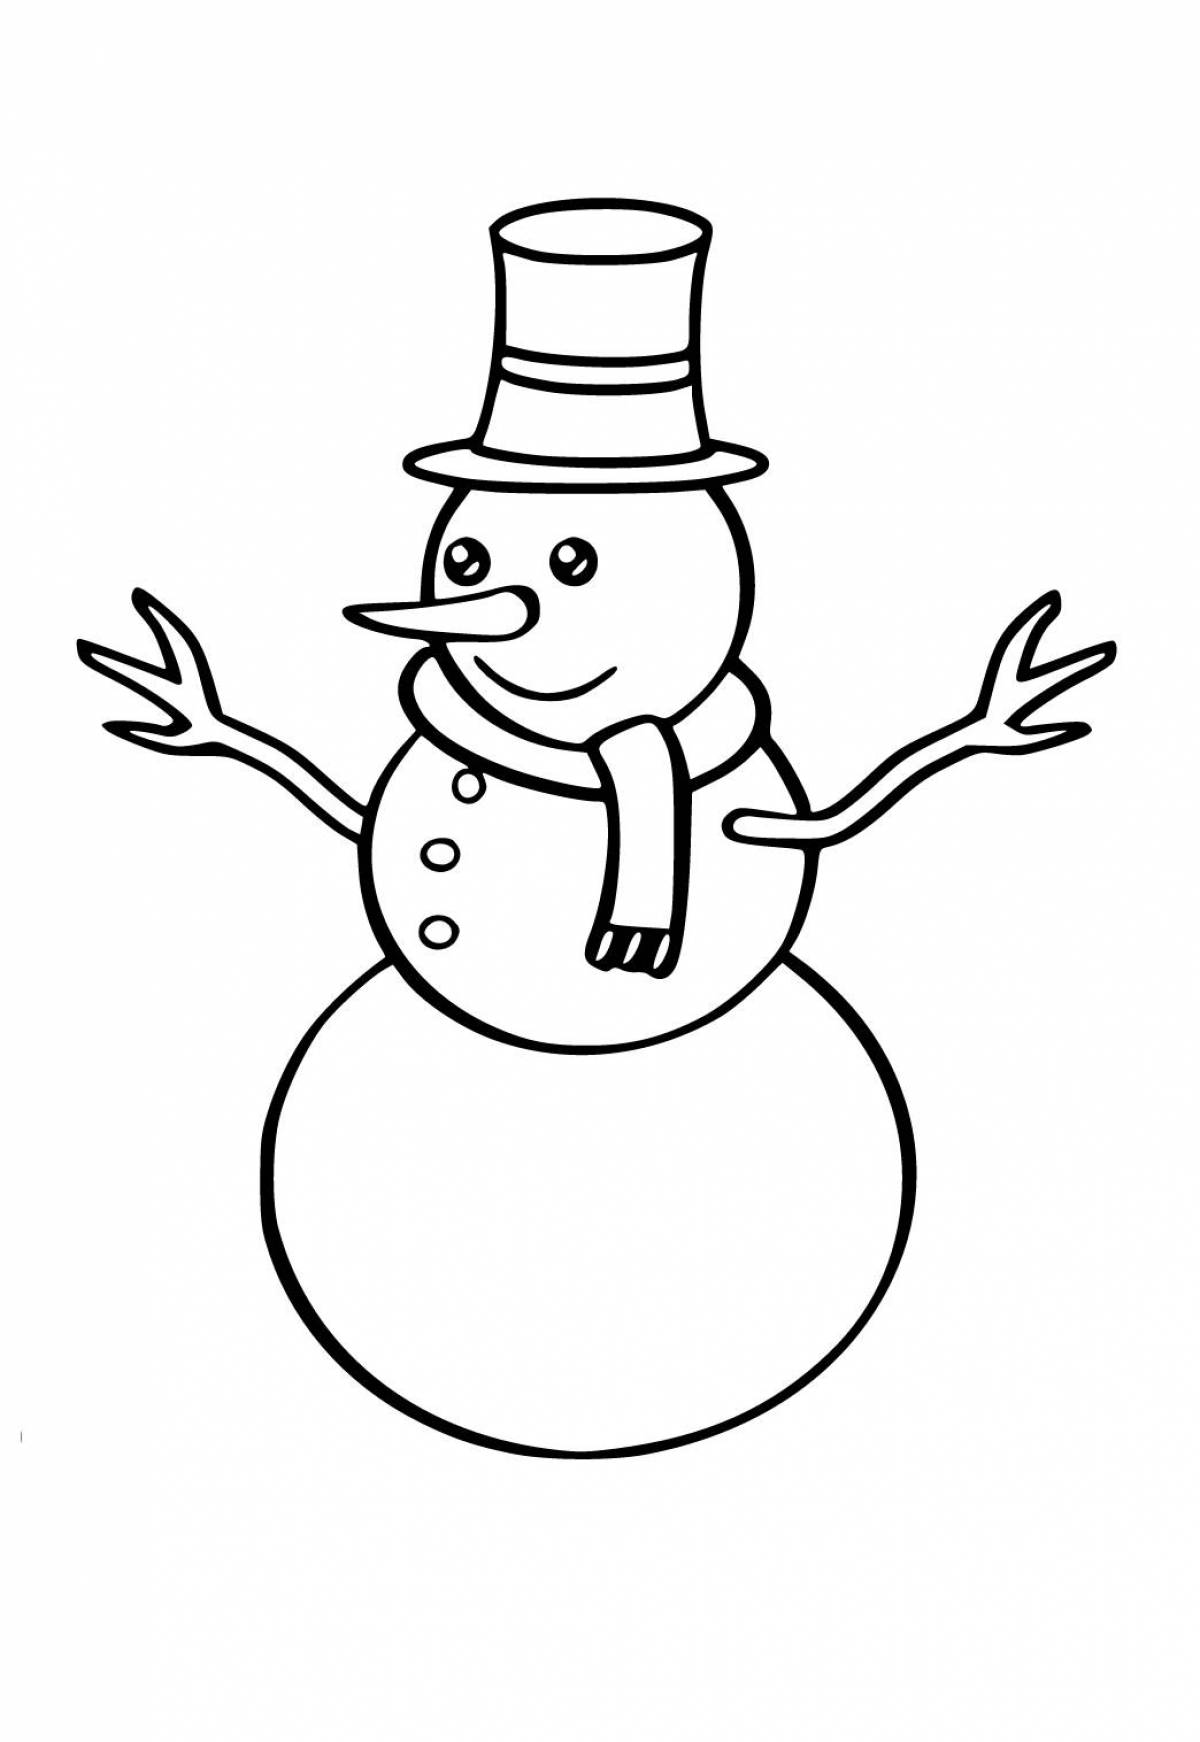 Live coloring snowman for children 6-7 years old